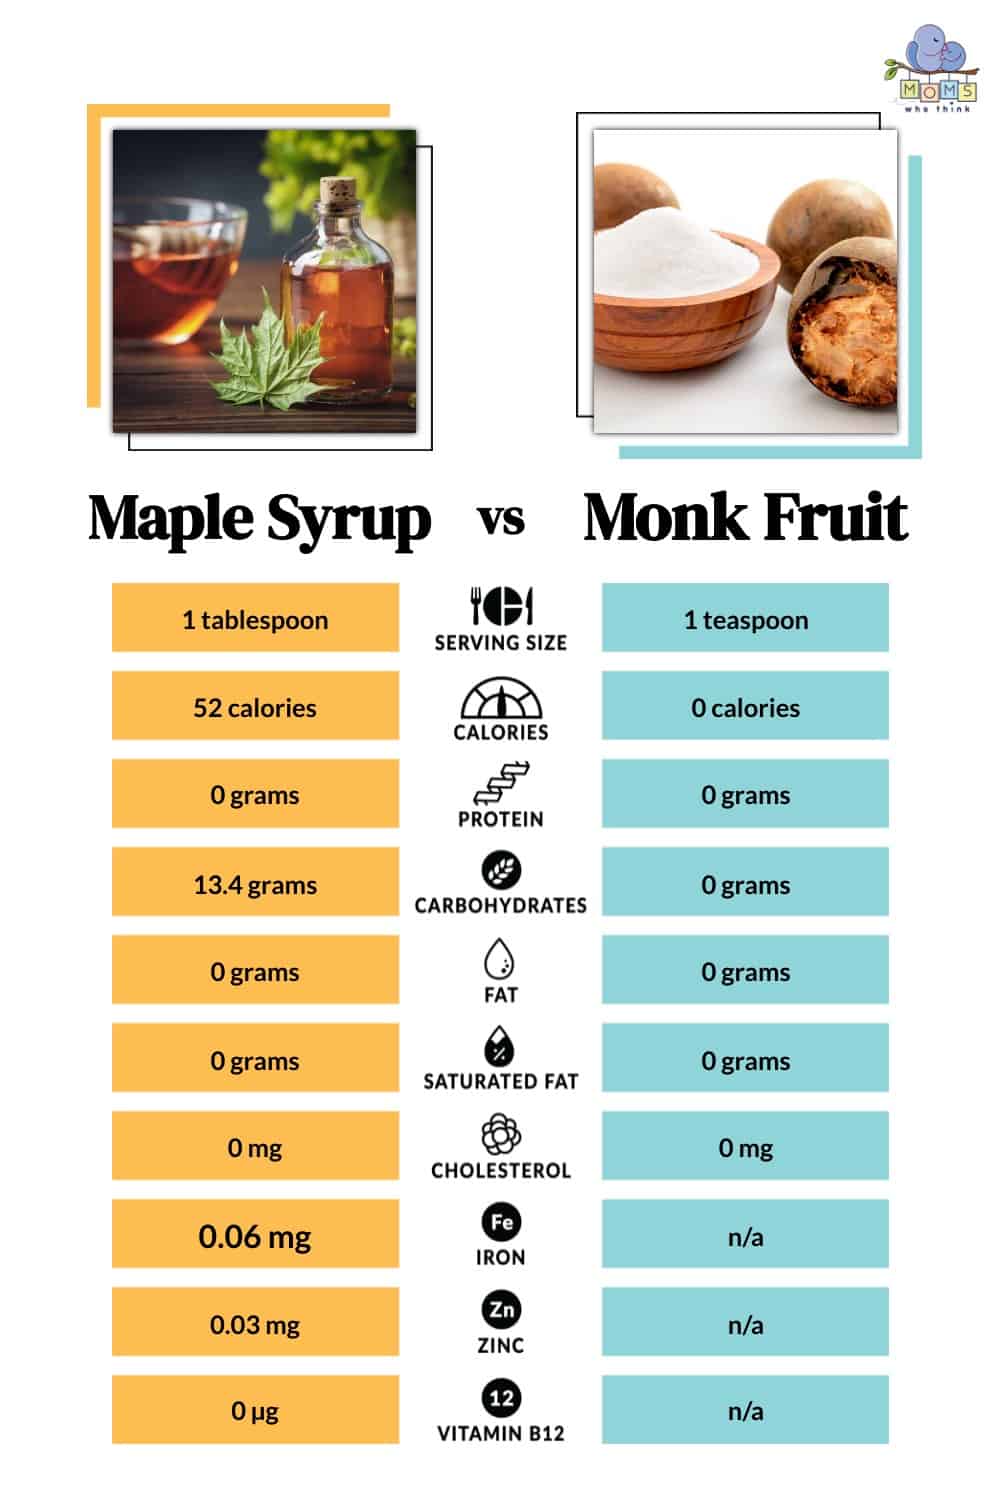 Maple Syrup vs Monk Fruit Nutritional Facts